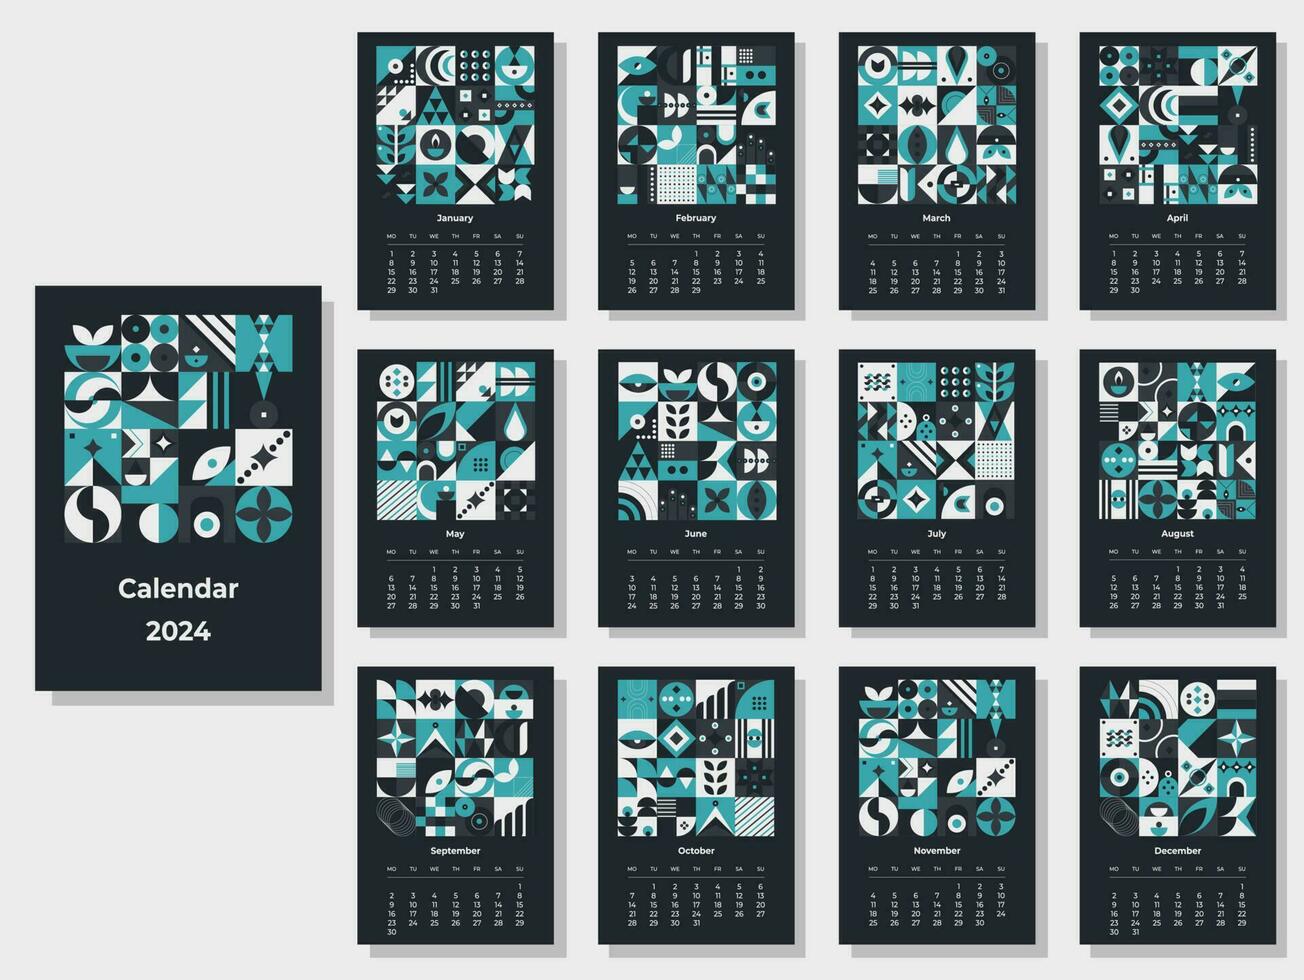 Calendar 2024 geometric patterns. Monthly calendar template for 2024 year with geometric shapes. vector